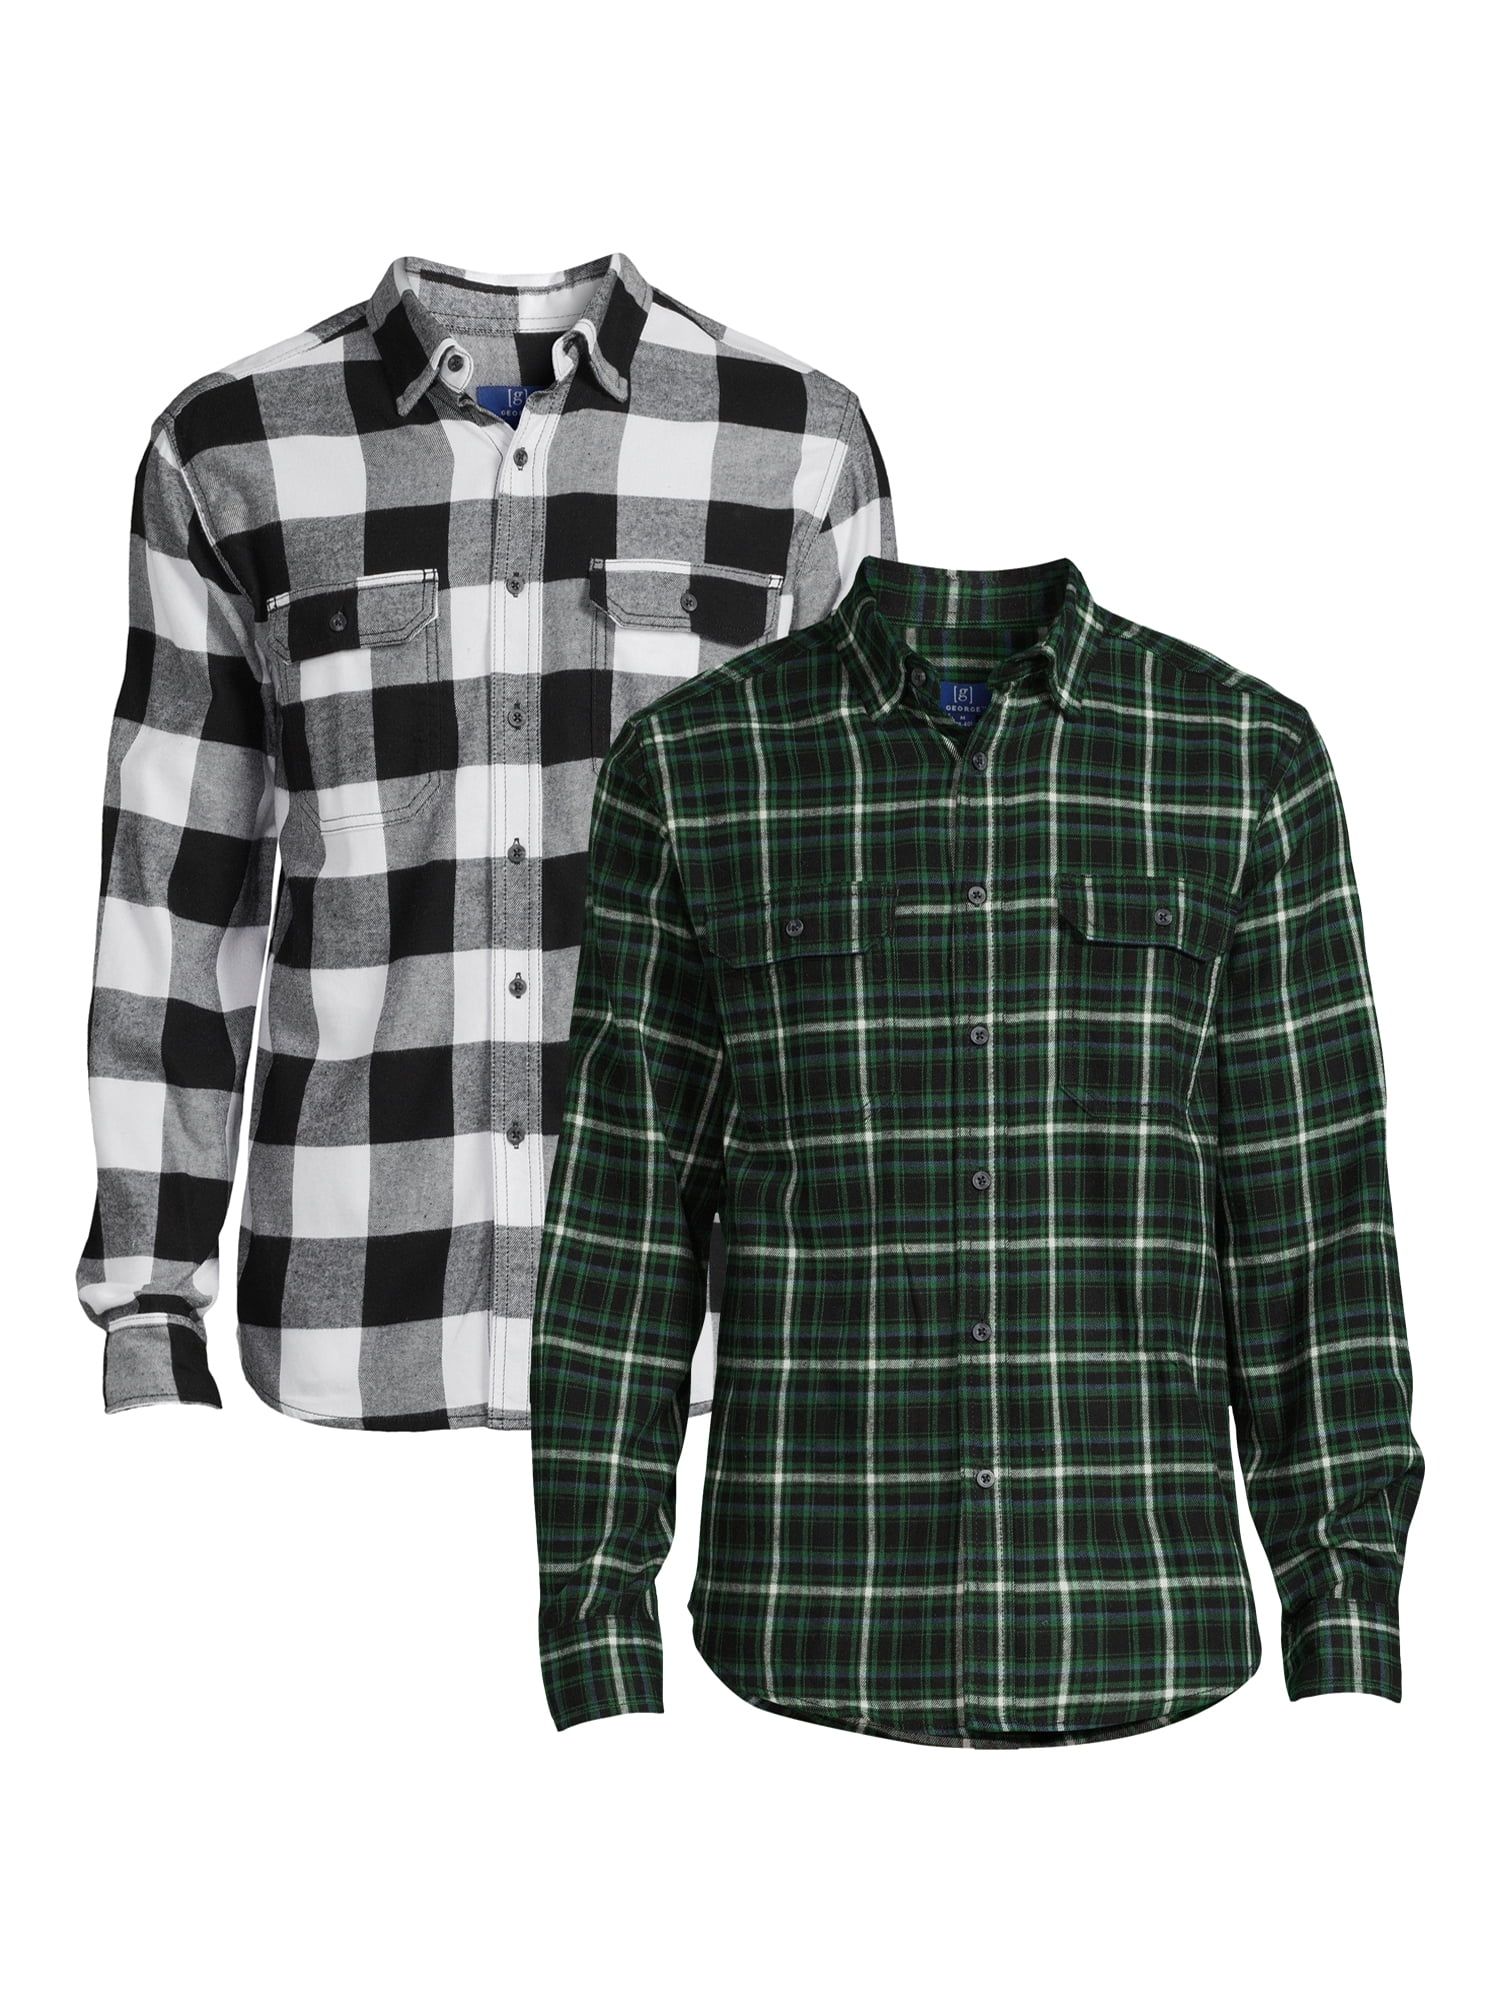 George Men's Long Sleeve Flannel Shirts, 2-Pack, Sizes S-2XL | Walmart (US)